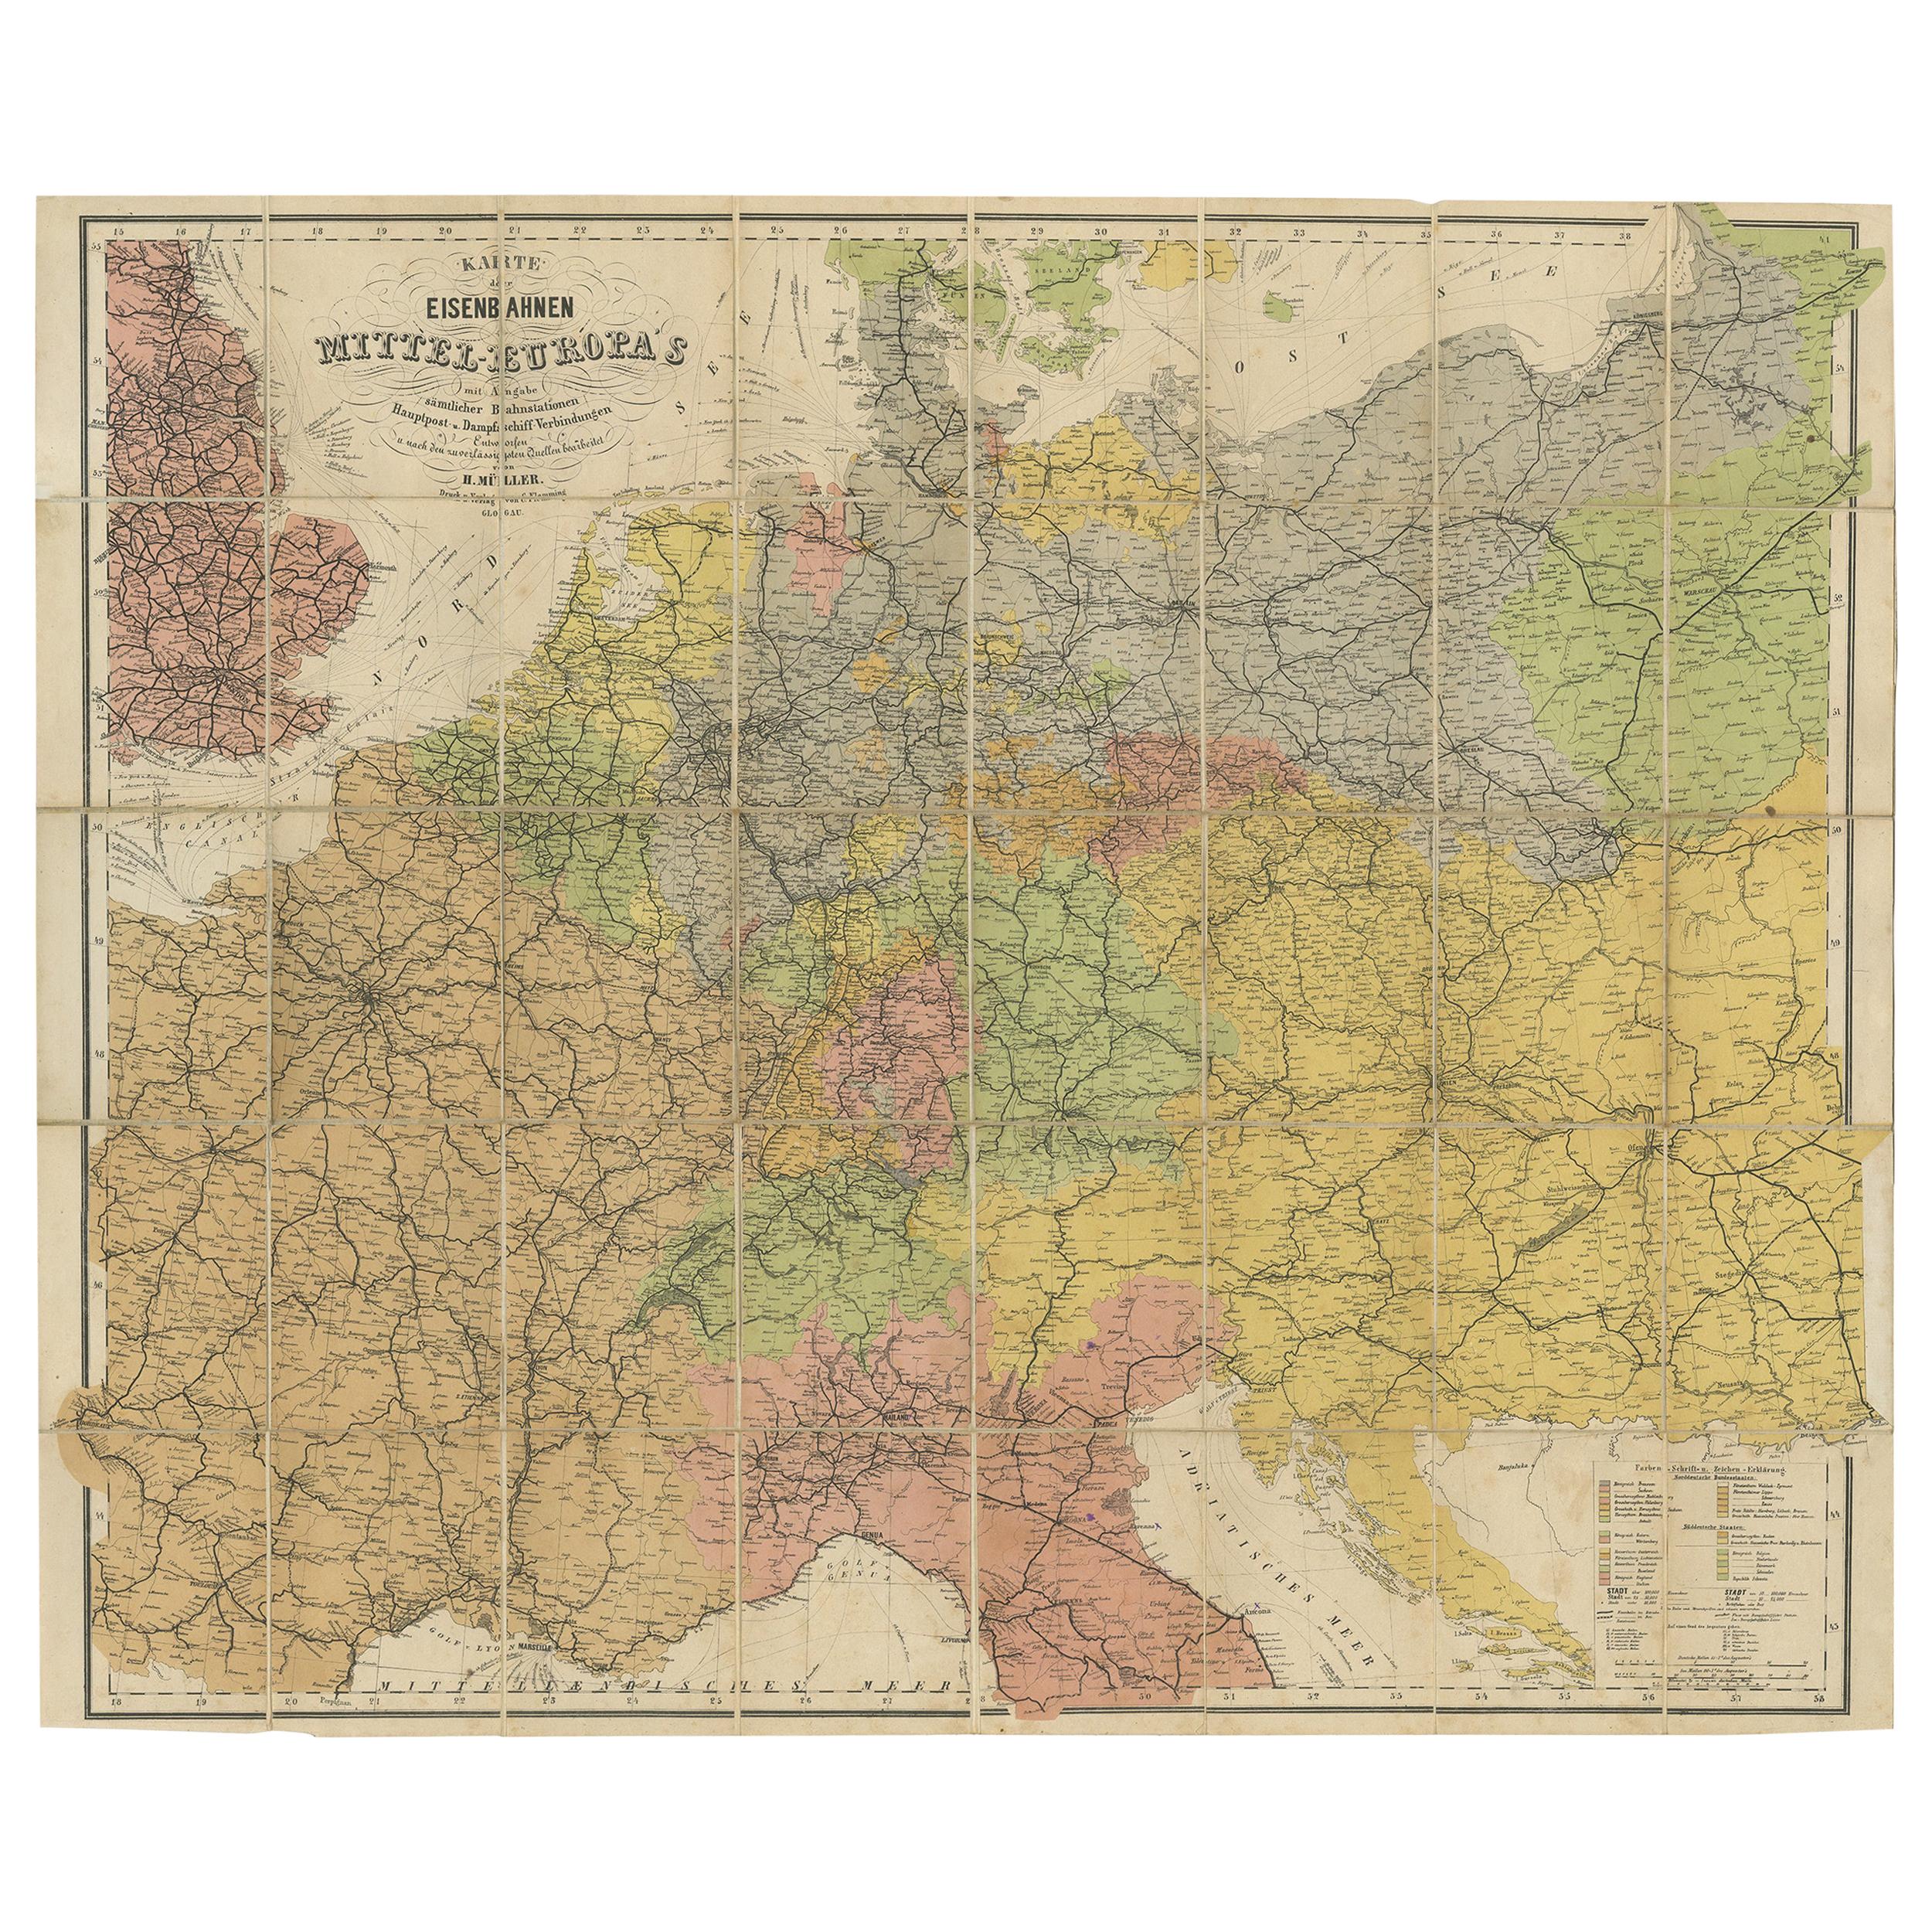 Antique Railway Folding Map of Central Europe by Müller, 1870